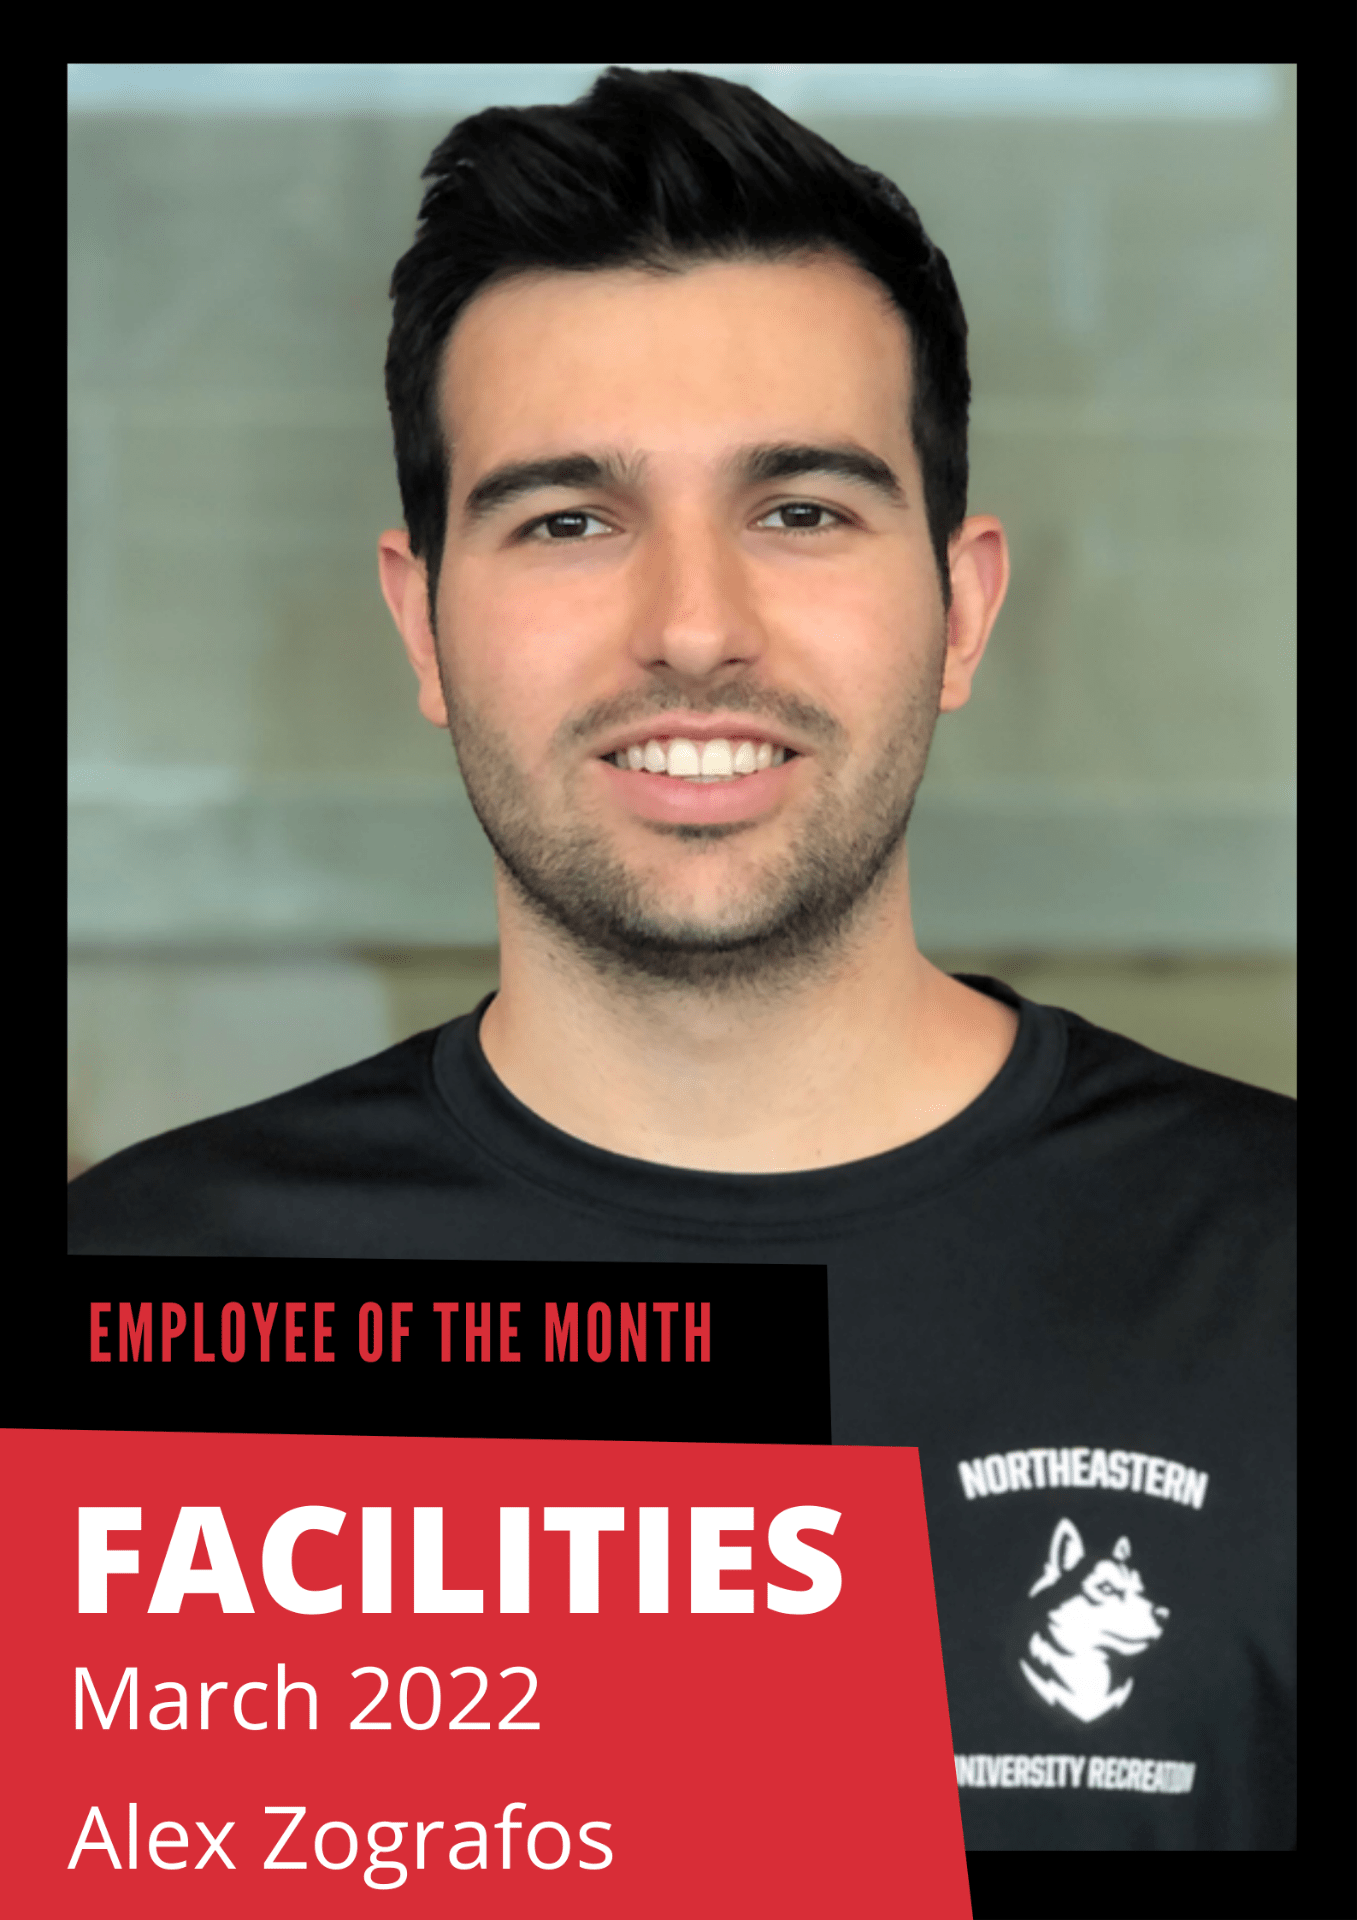 Employee of the Month, Facilities, March 2022, Alex Zografos